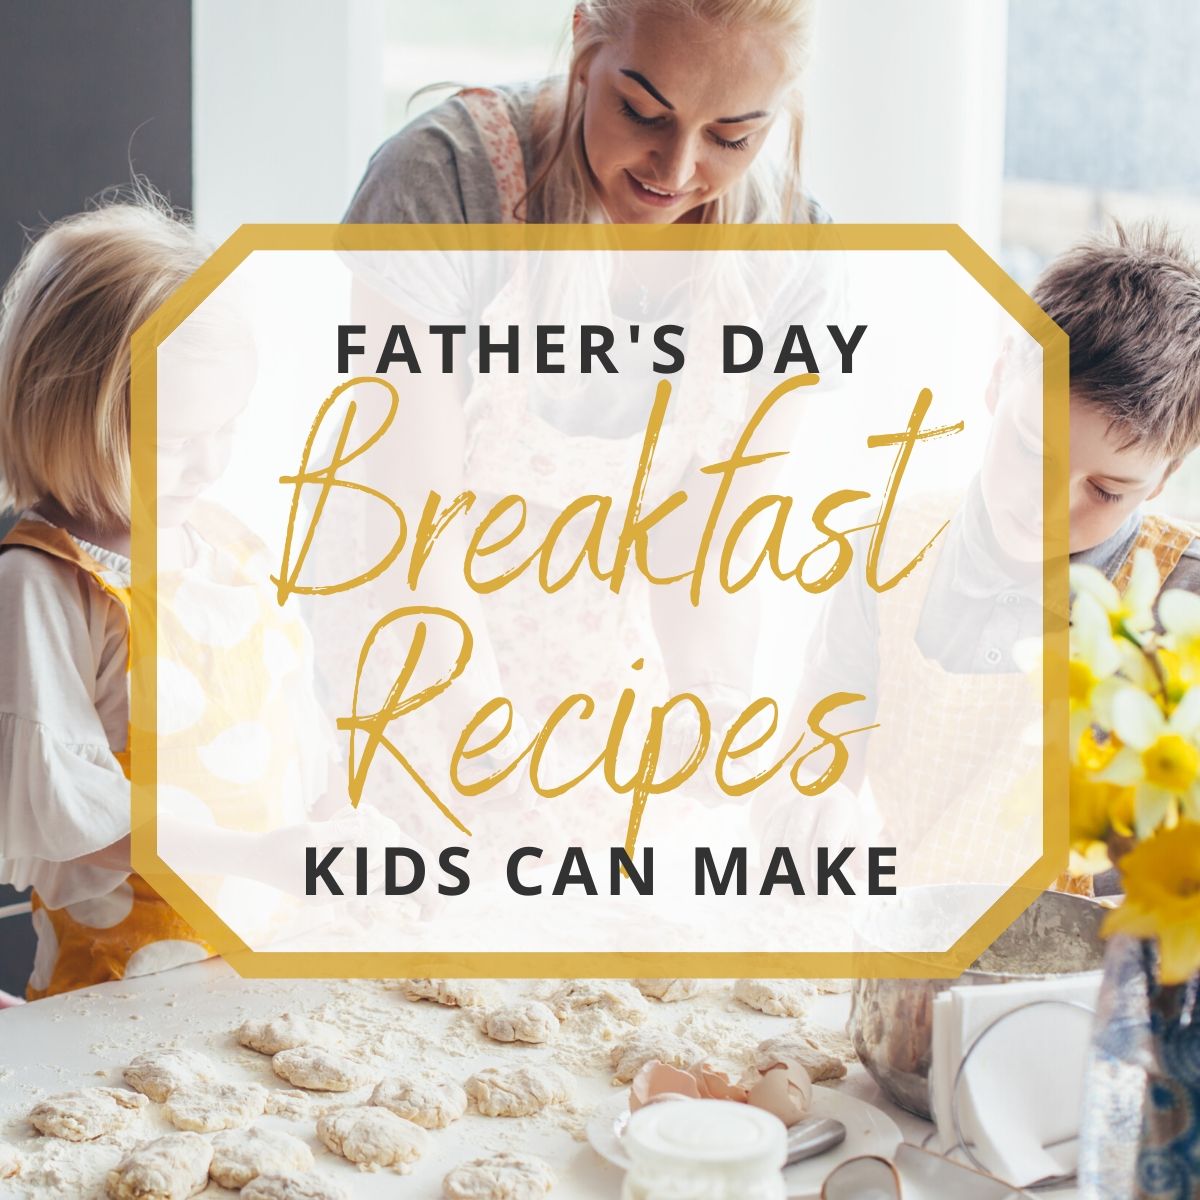 kids cooking Father's Day breakfast